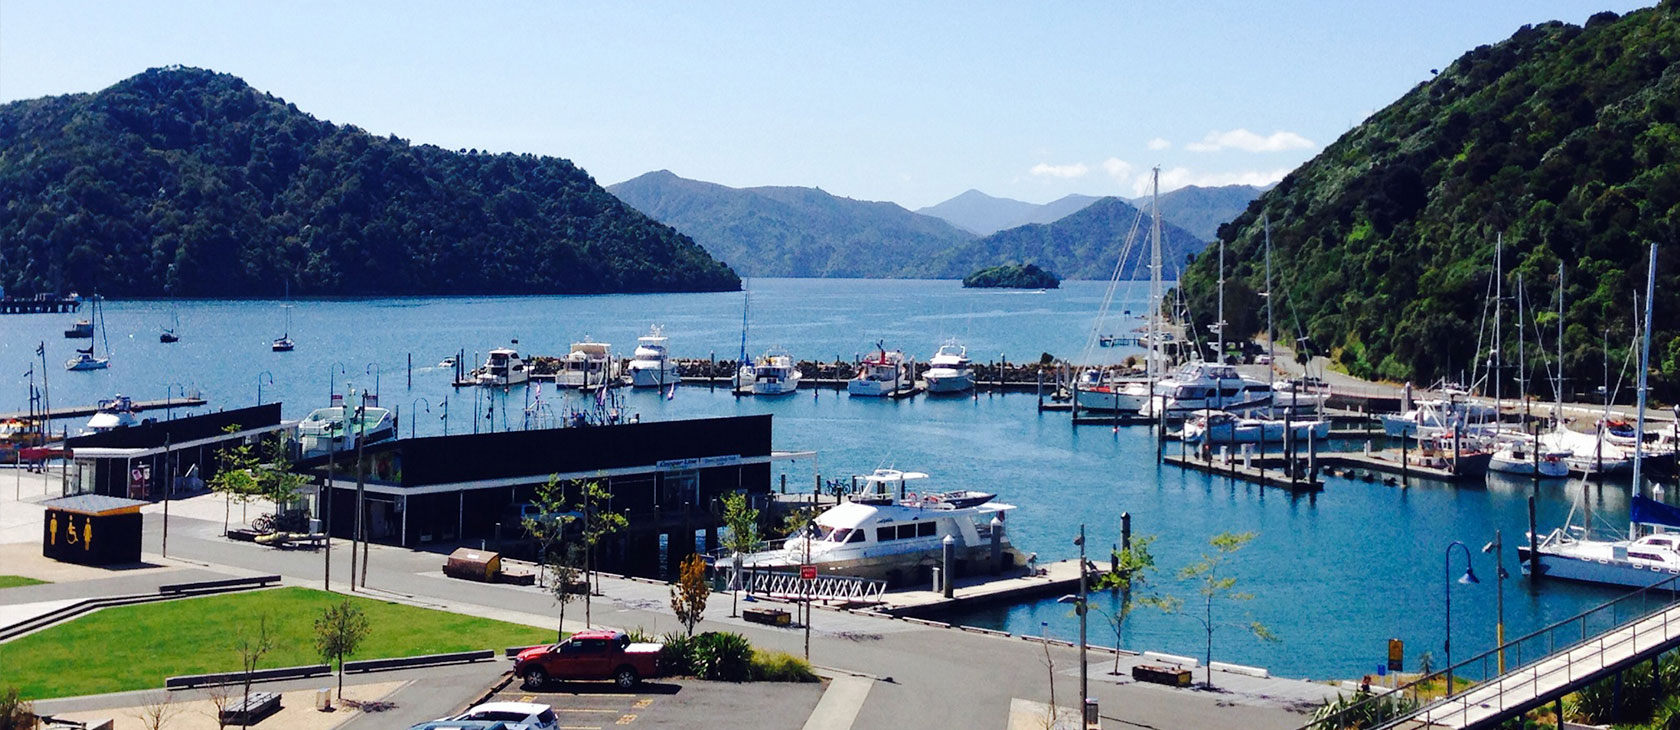 Picton waterfront right in front of the Picton Yacht Club Hotel